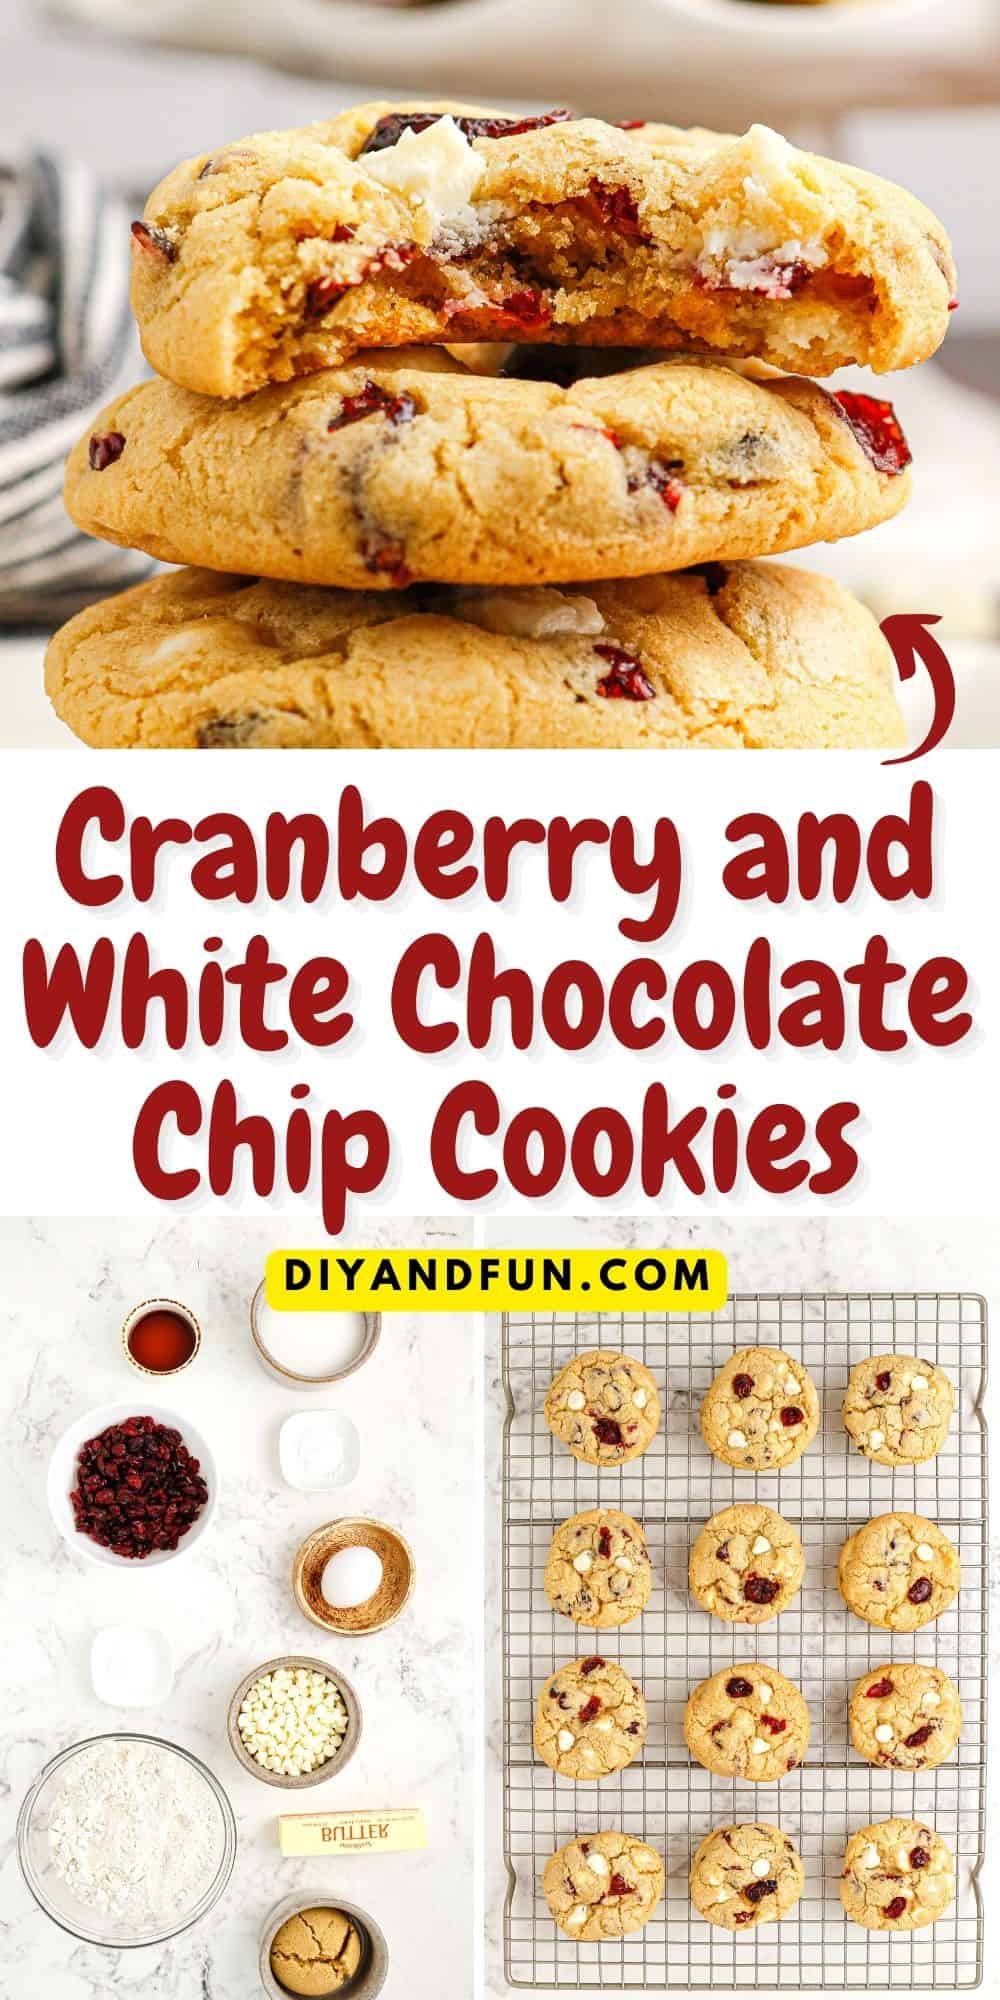 Cranberry and White Chocolate Chip Cookies, a delicious dessert or snack recipe made with real cranberries. Perfect holiday cookie idea! 